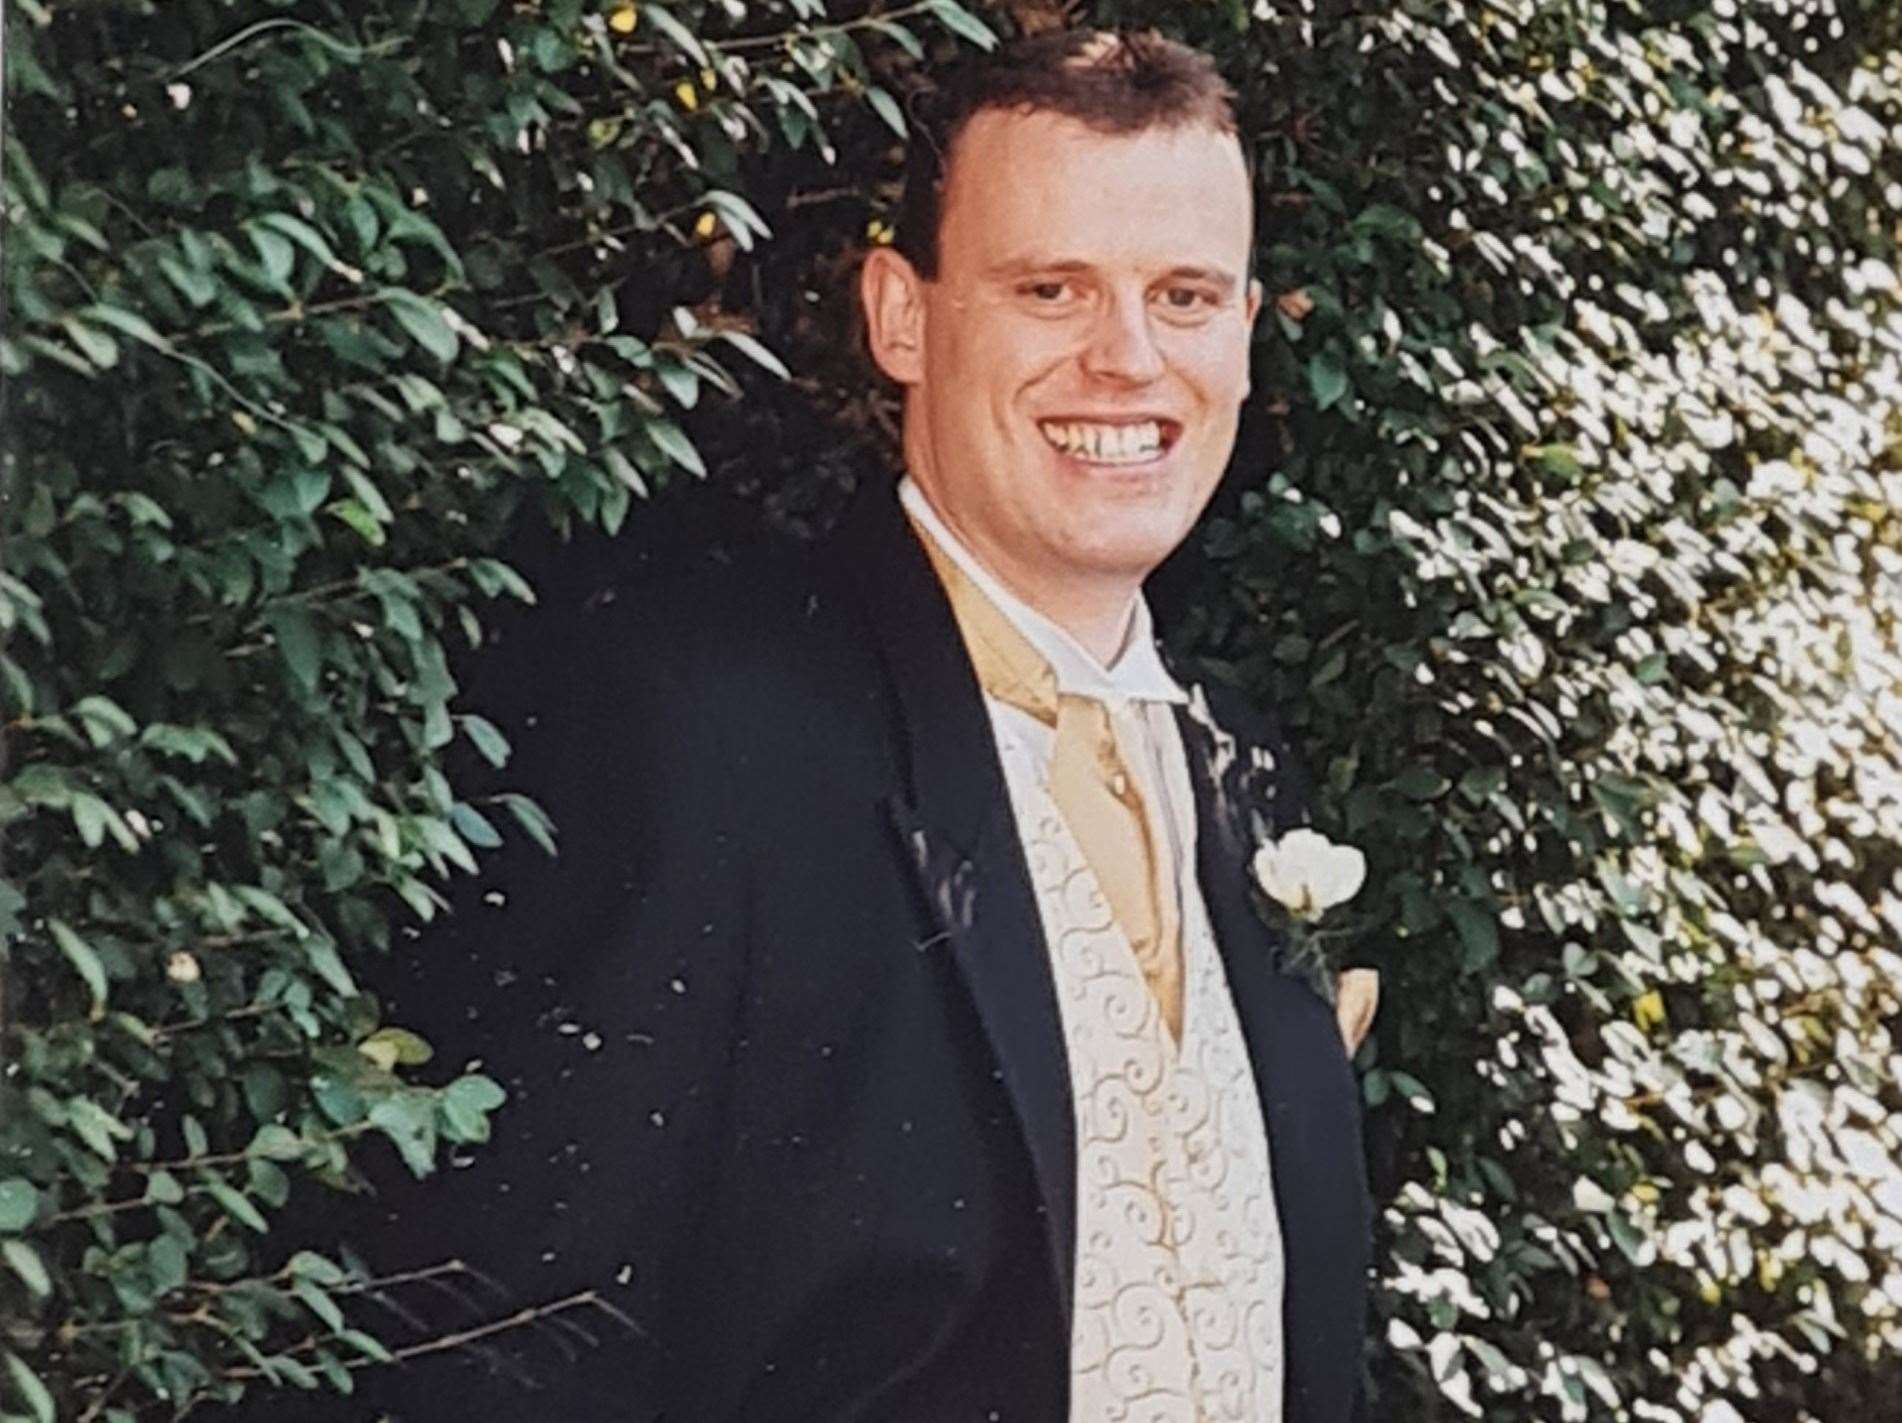 Steven Lawn on his wedding day